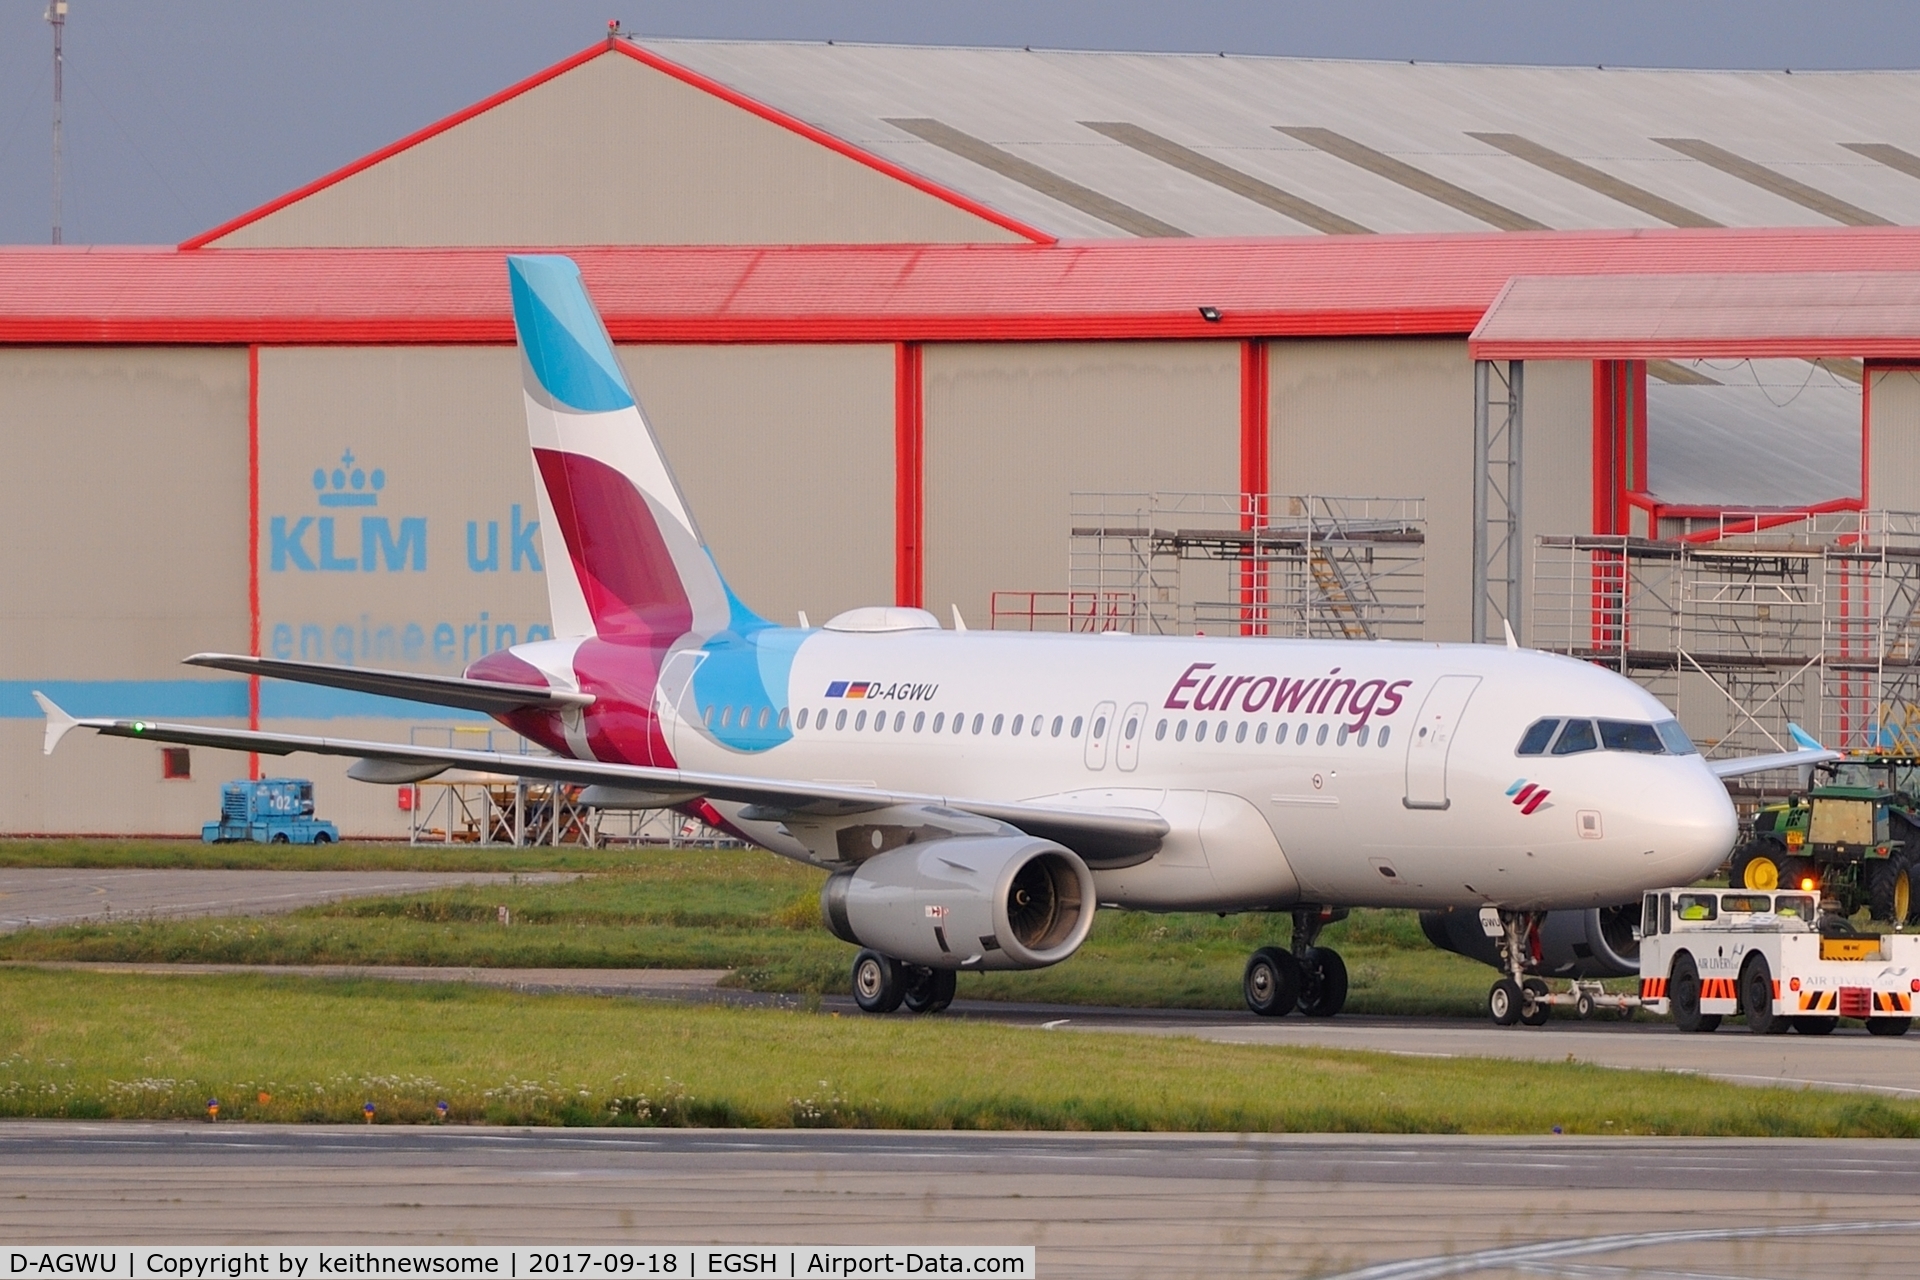 D-AGWU, 2013 Airbus A319-132 C/N 5457, Towed from paint with Eurowings colour scheme.